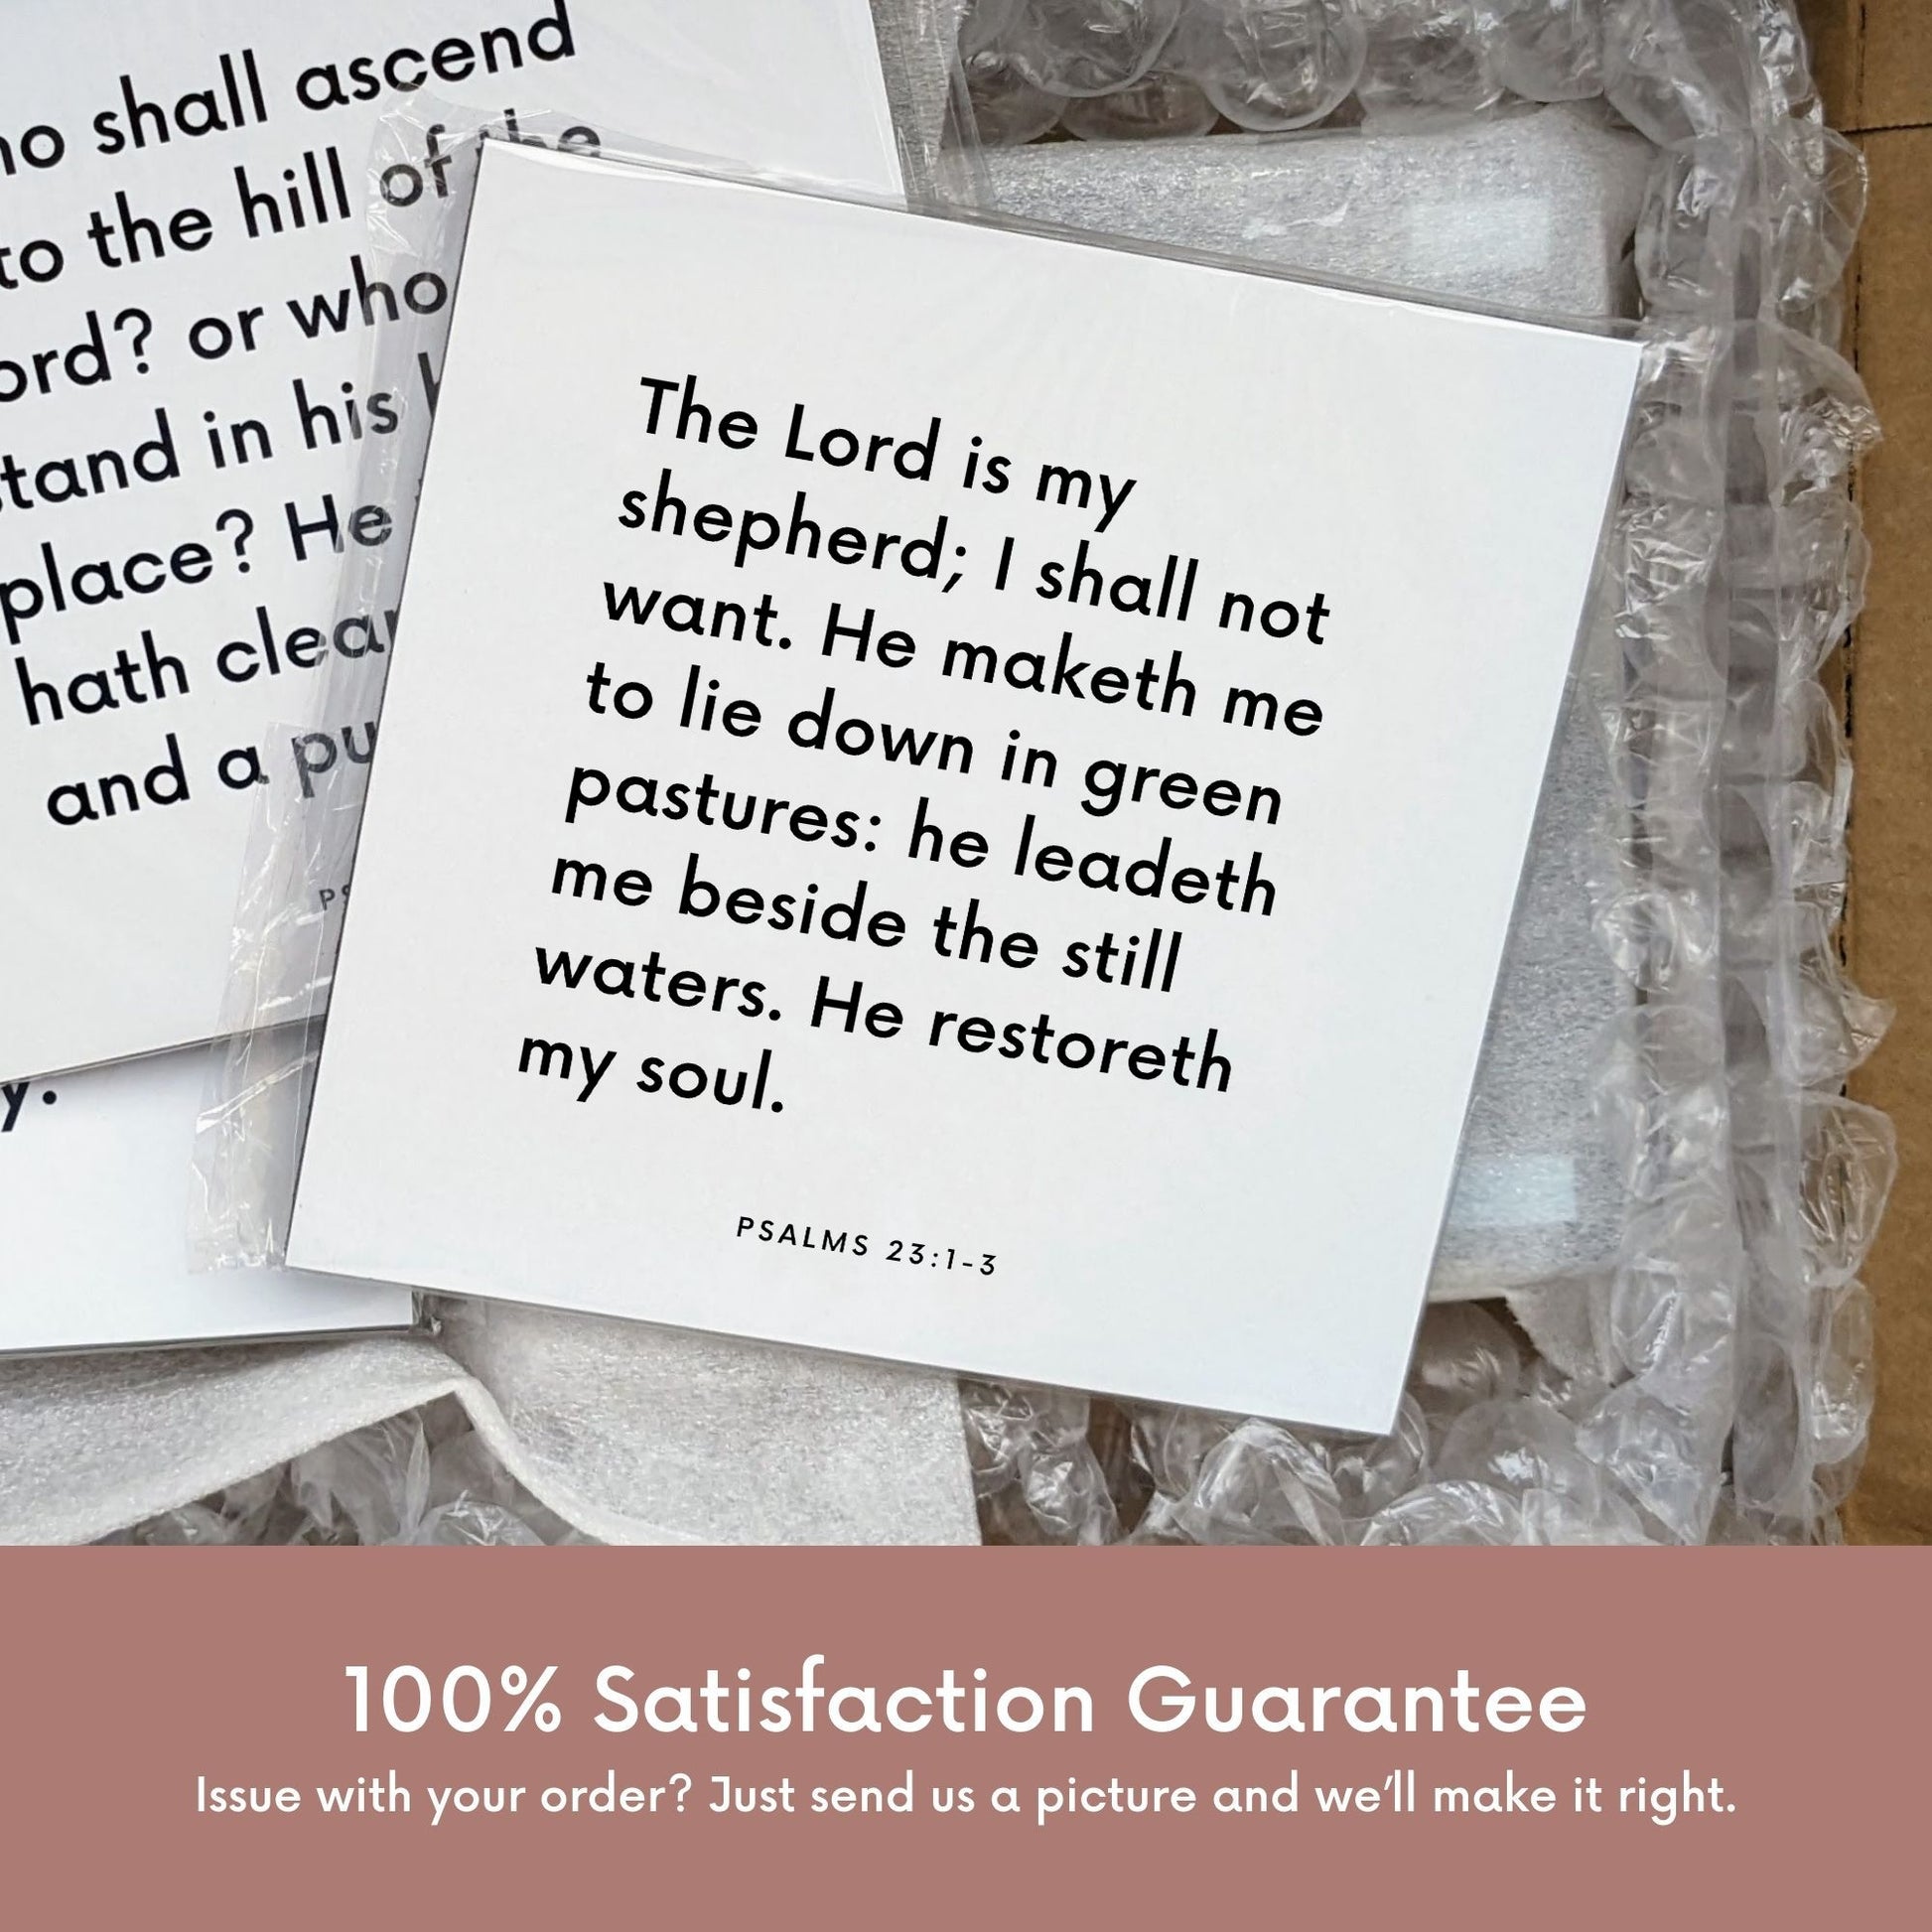 Shipping materials for scripture tile of Psalms 23:1-3 - "The Lord is my shepherd; I shall not want"